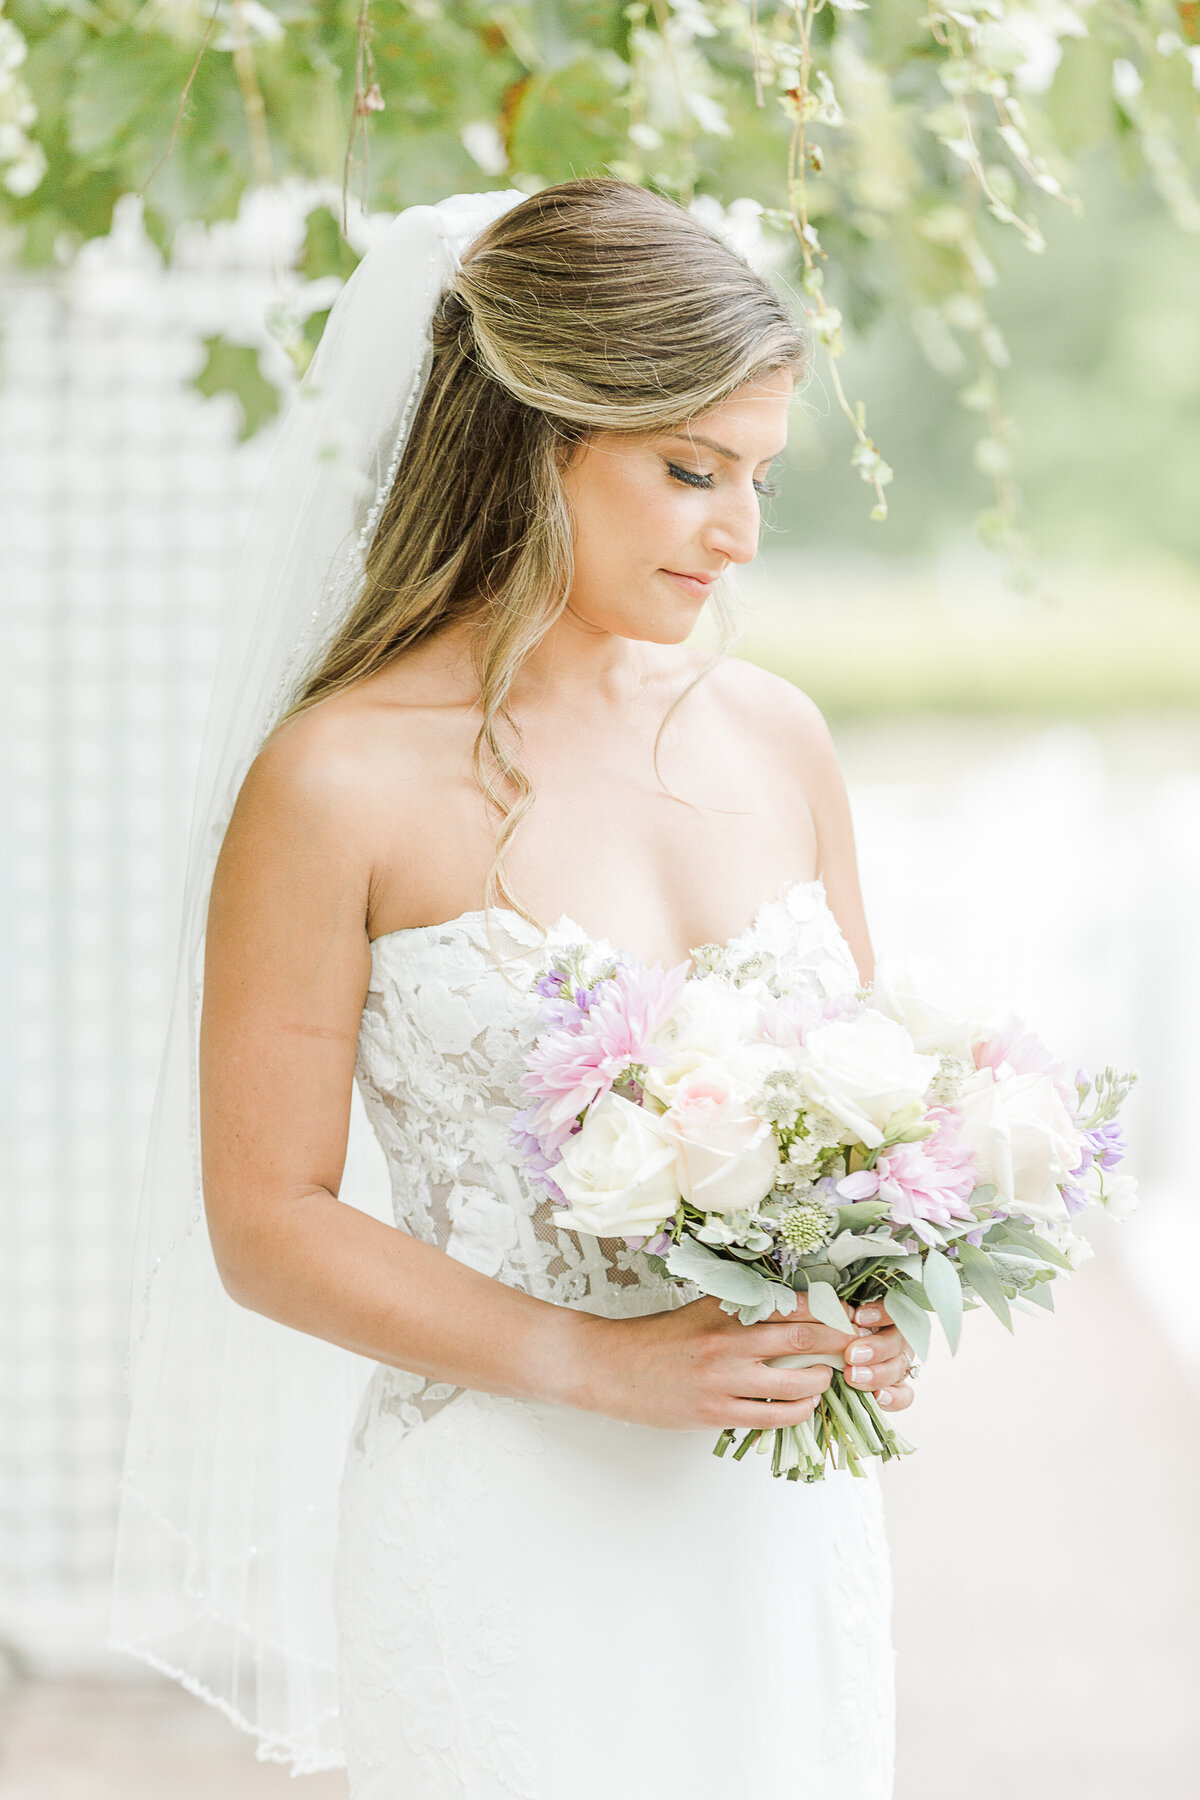 A bride poses for a formal wedding day portrait at the Five Bridge Inn. The bridge is standing angled away from the camera, she is holding her bouquet in front of her and looking down at the flowers. Captured by MA wedding photographer Lia Rose Weddings